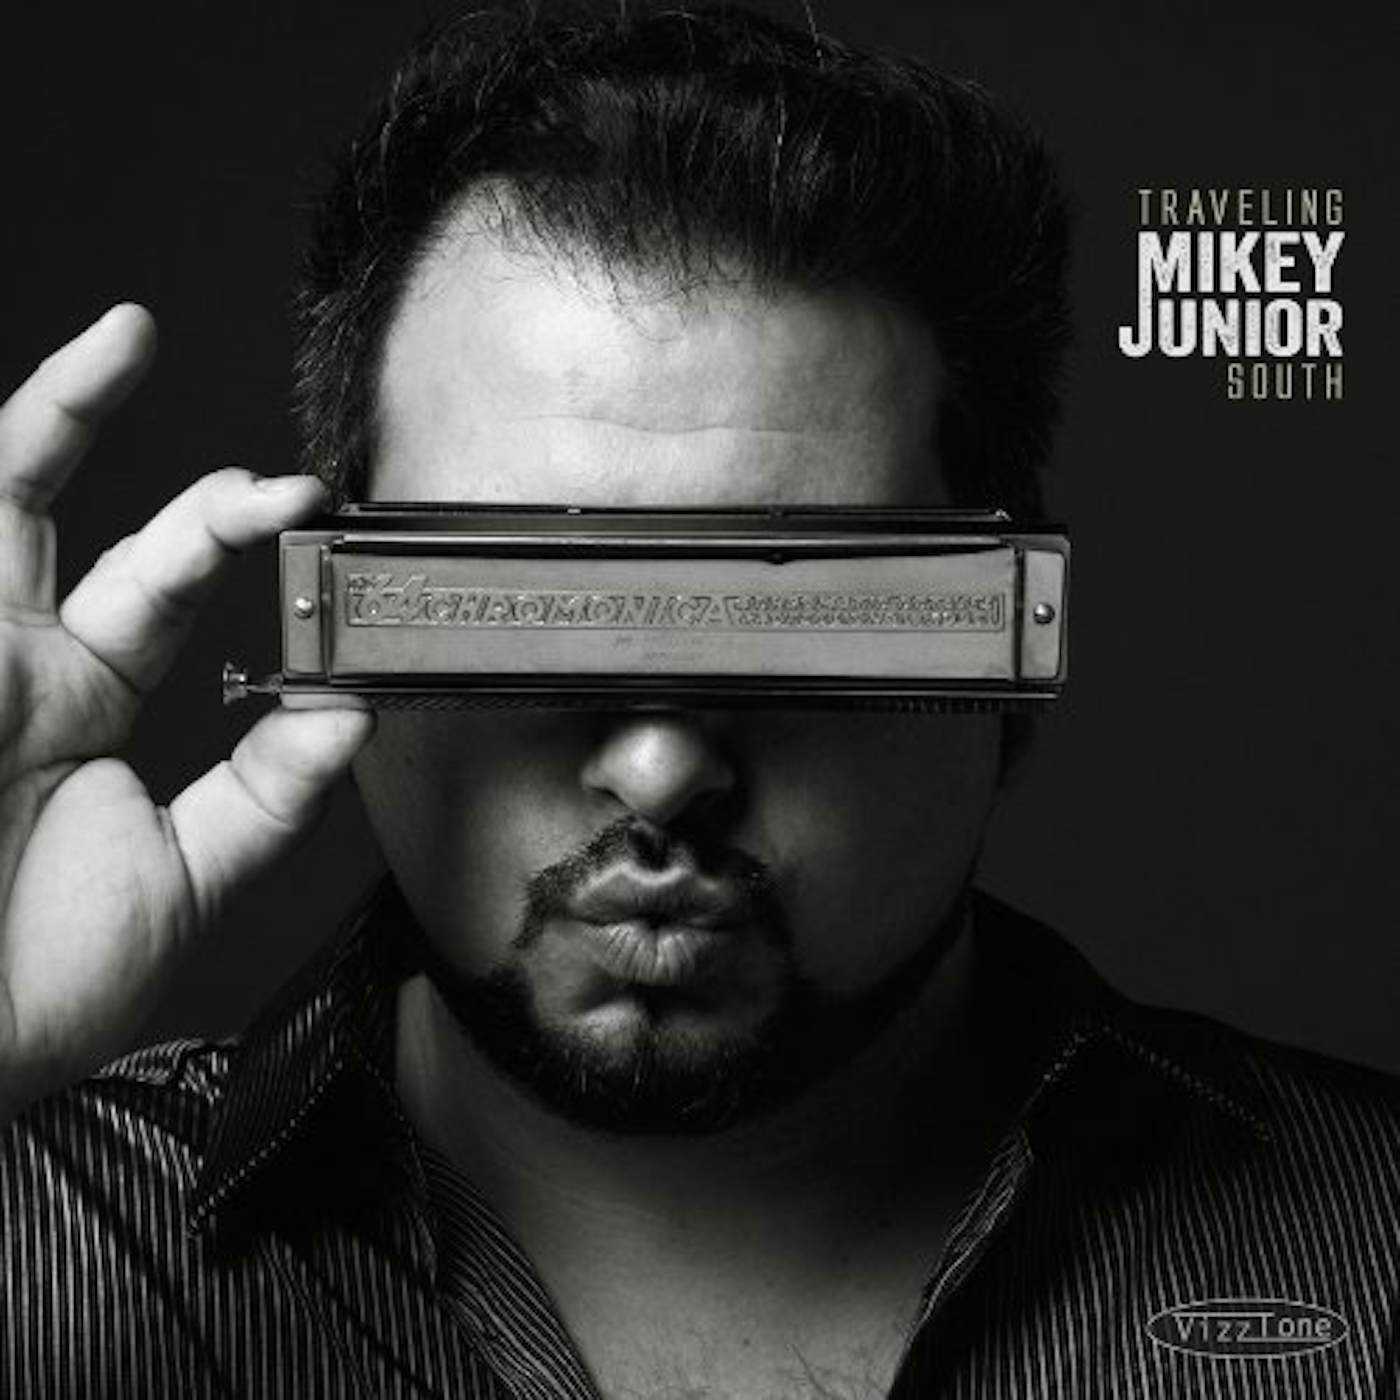 Mikey Junior Traveling South Vinyl Record